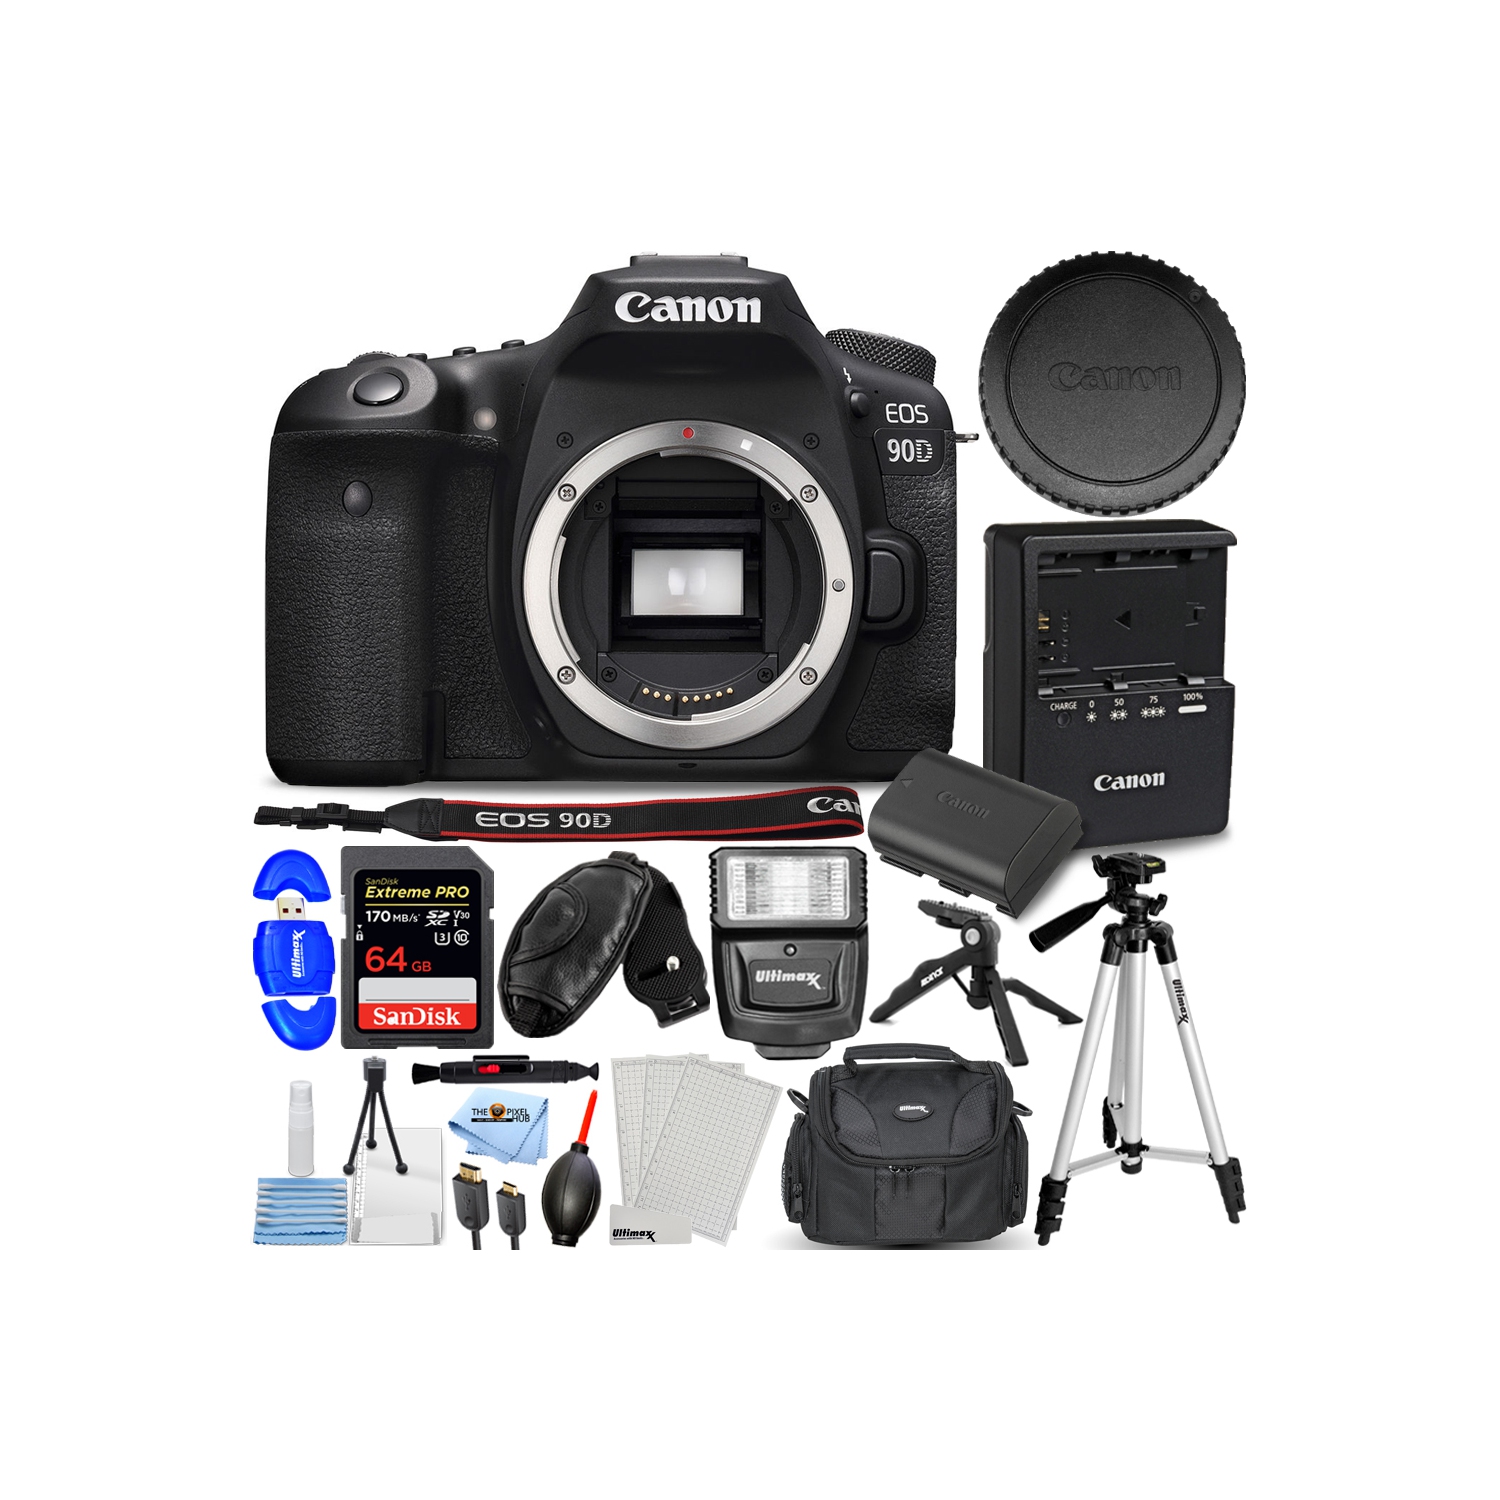 Canon EOS 90D DSLR (Body Only) 3616C002 - Pro Bundle Includes: 64GB Extreme Pro SD, Slave Flash, Tripod, Gadget Bag, HDMI Cable and More With 1 Year Seller Warranty